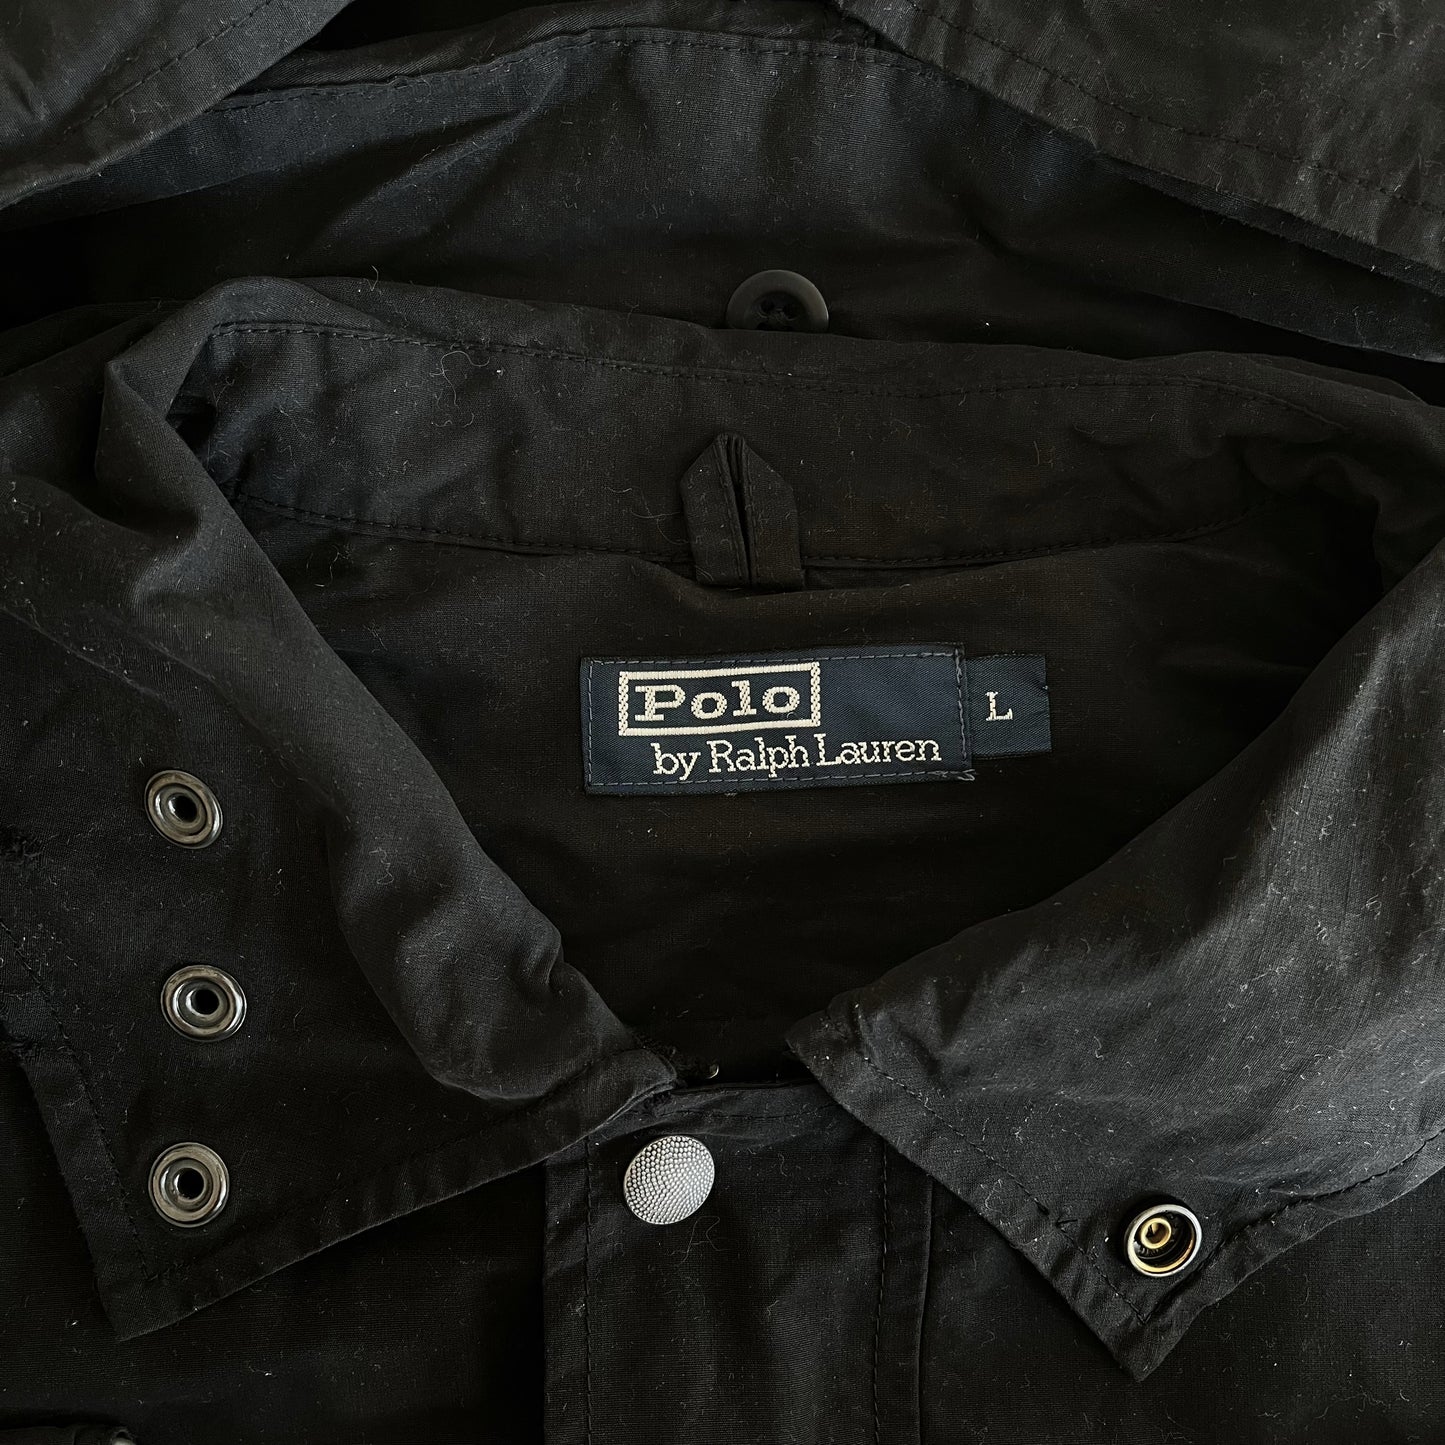 Vintage 90s Polo Ralph Lauren Utility Jacket With Fold Away Mosquito Net Label - Casspios Dream